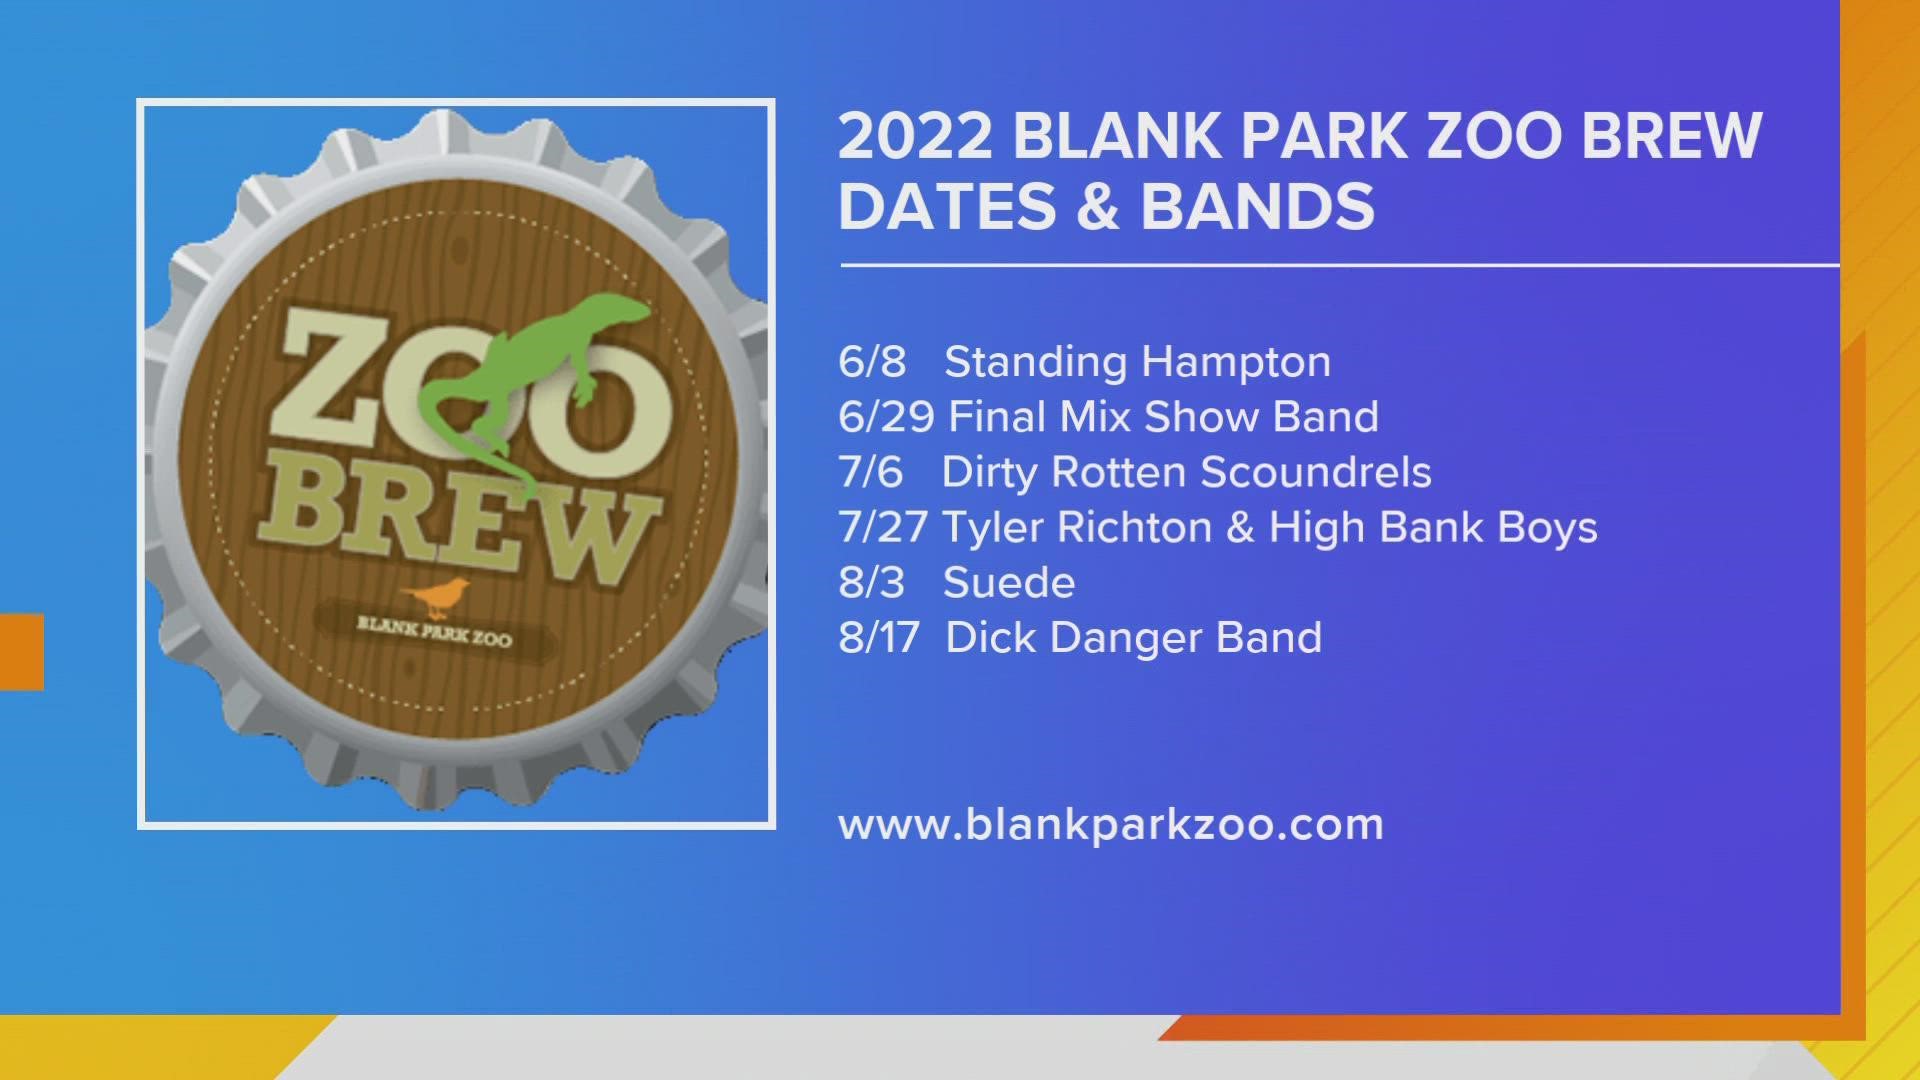 BLANK PARK ZOO BREW 2022 STARTS TONIGHT! Paid Content